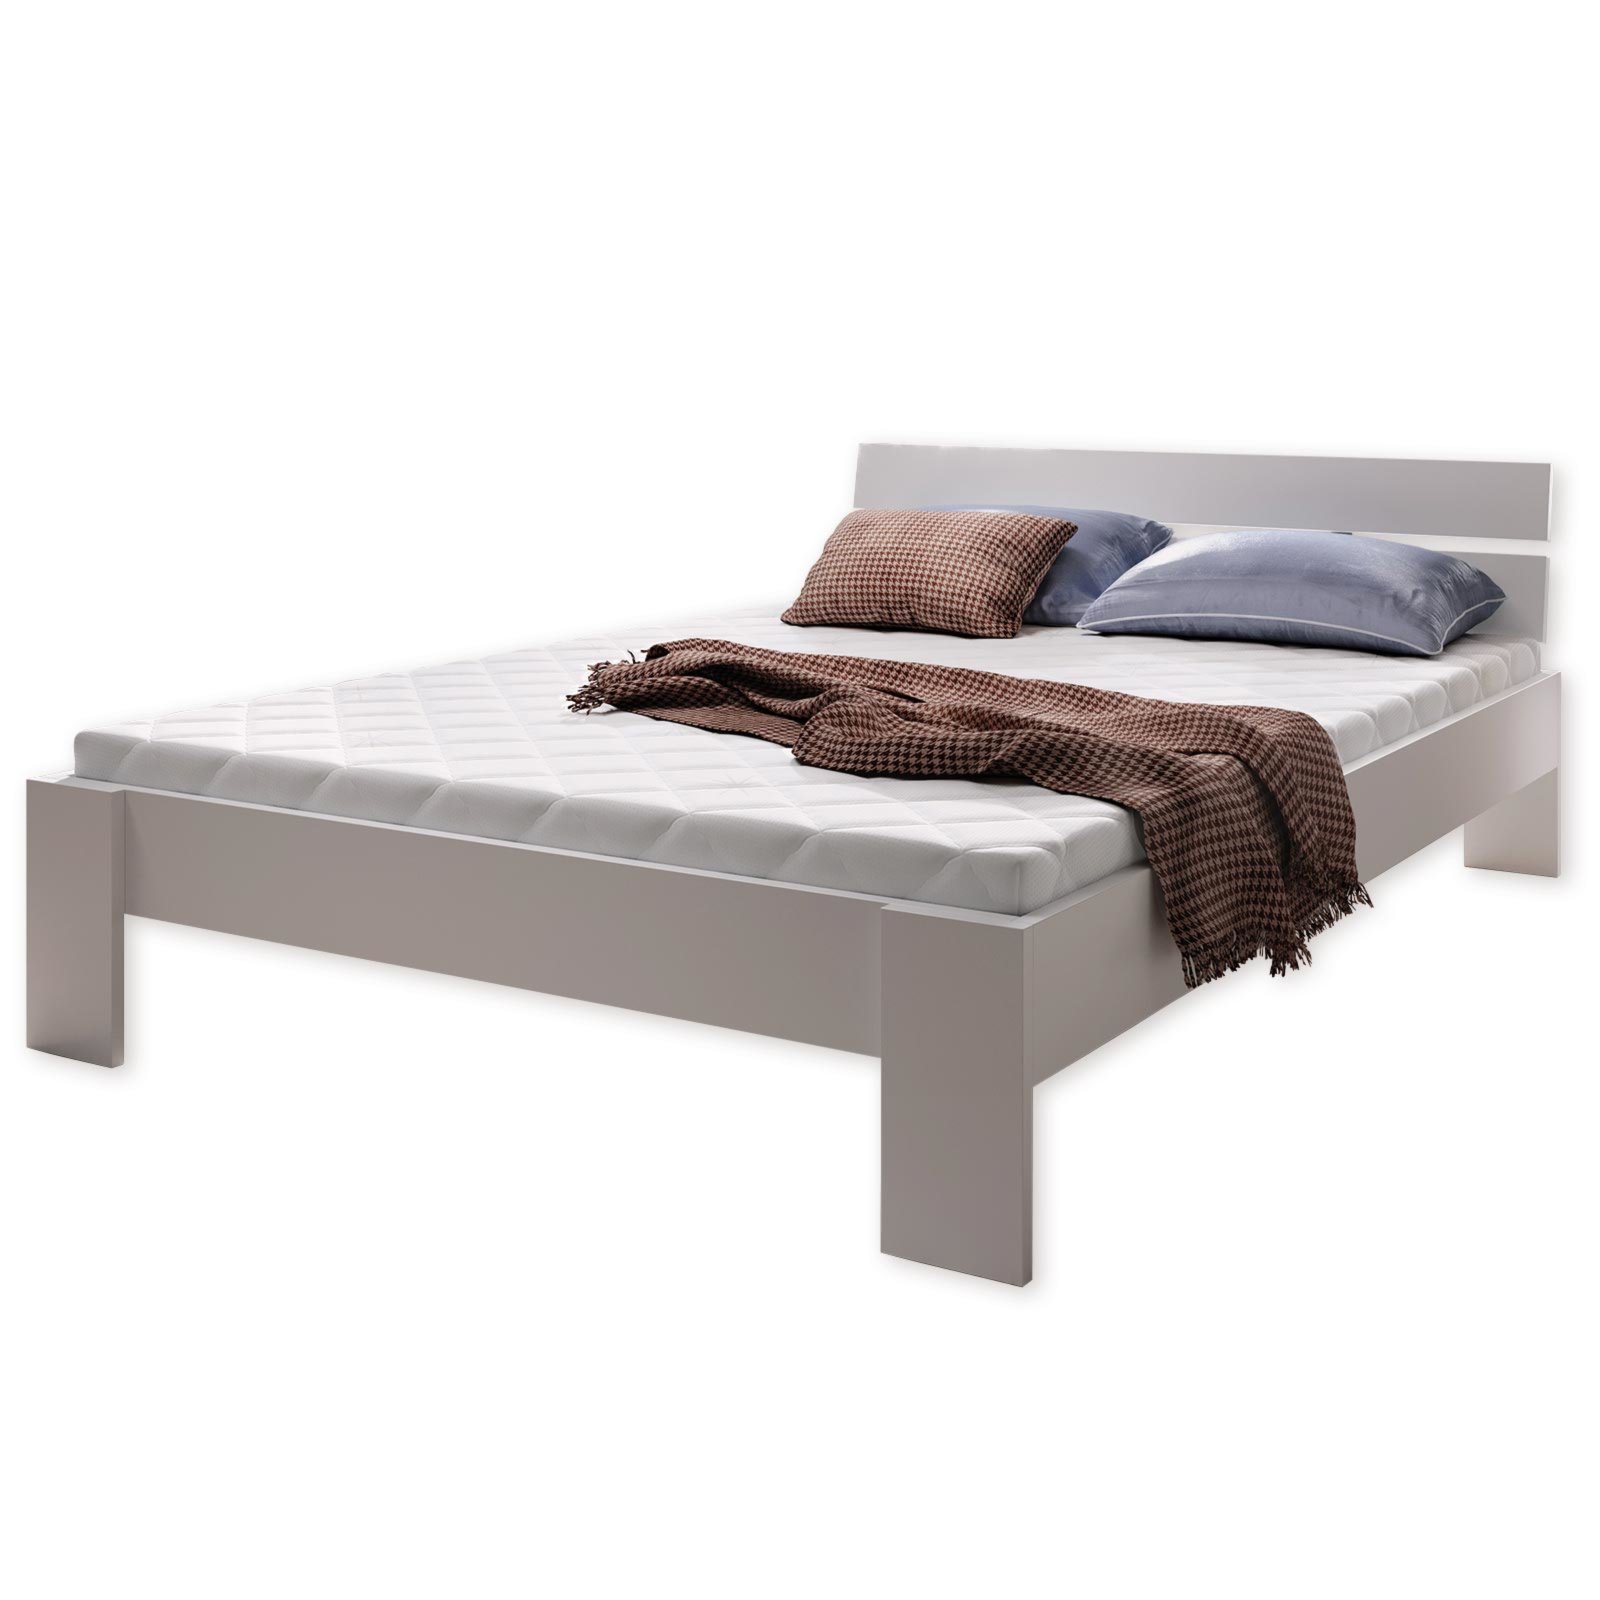 Why people are buying futon beds 140×200? post thumbnail image